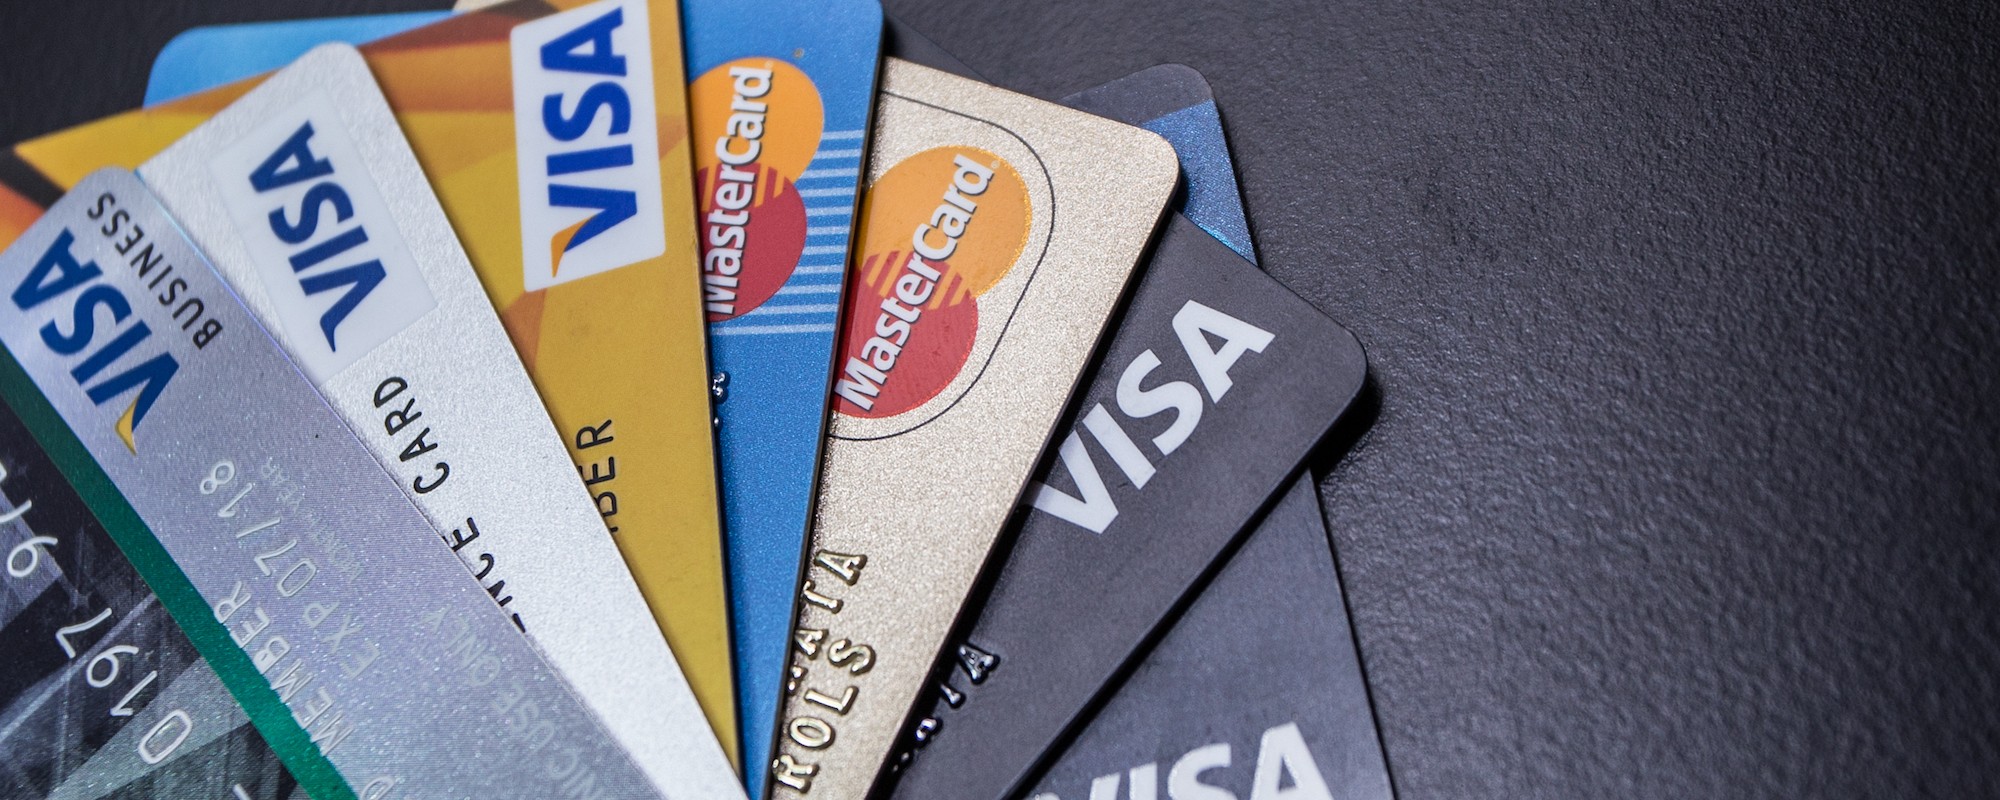 Feds Accuse Three Hackers Of Stealing 15 Million Credit Cards In